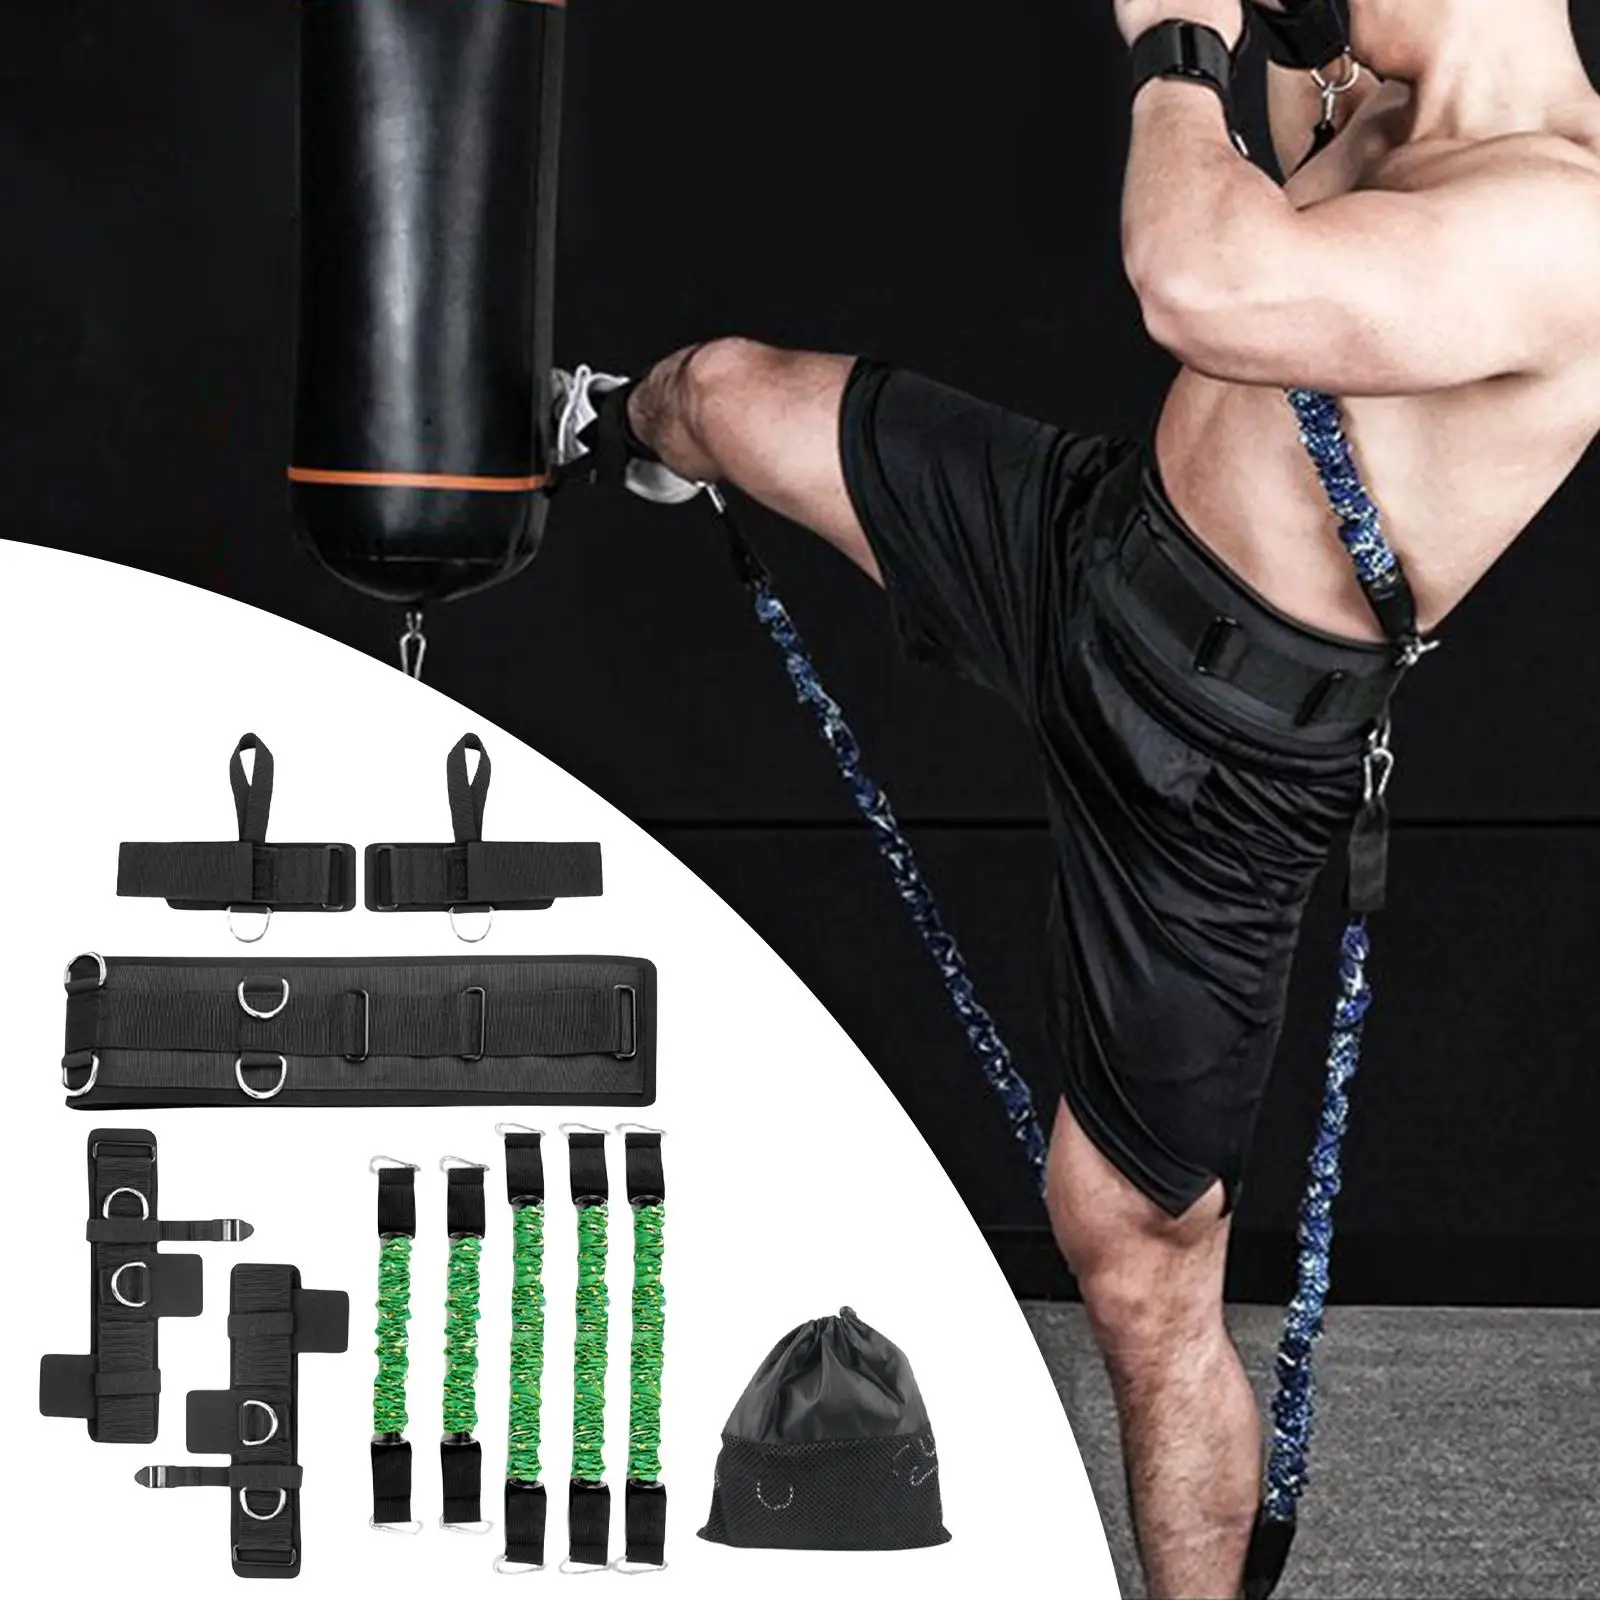 Boxing Resistance Training Exercise Band Kit Premium Materials Accessories